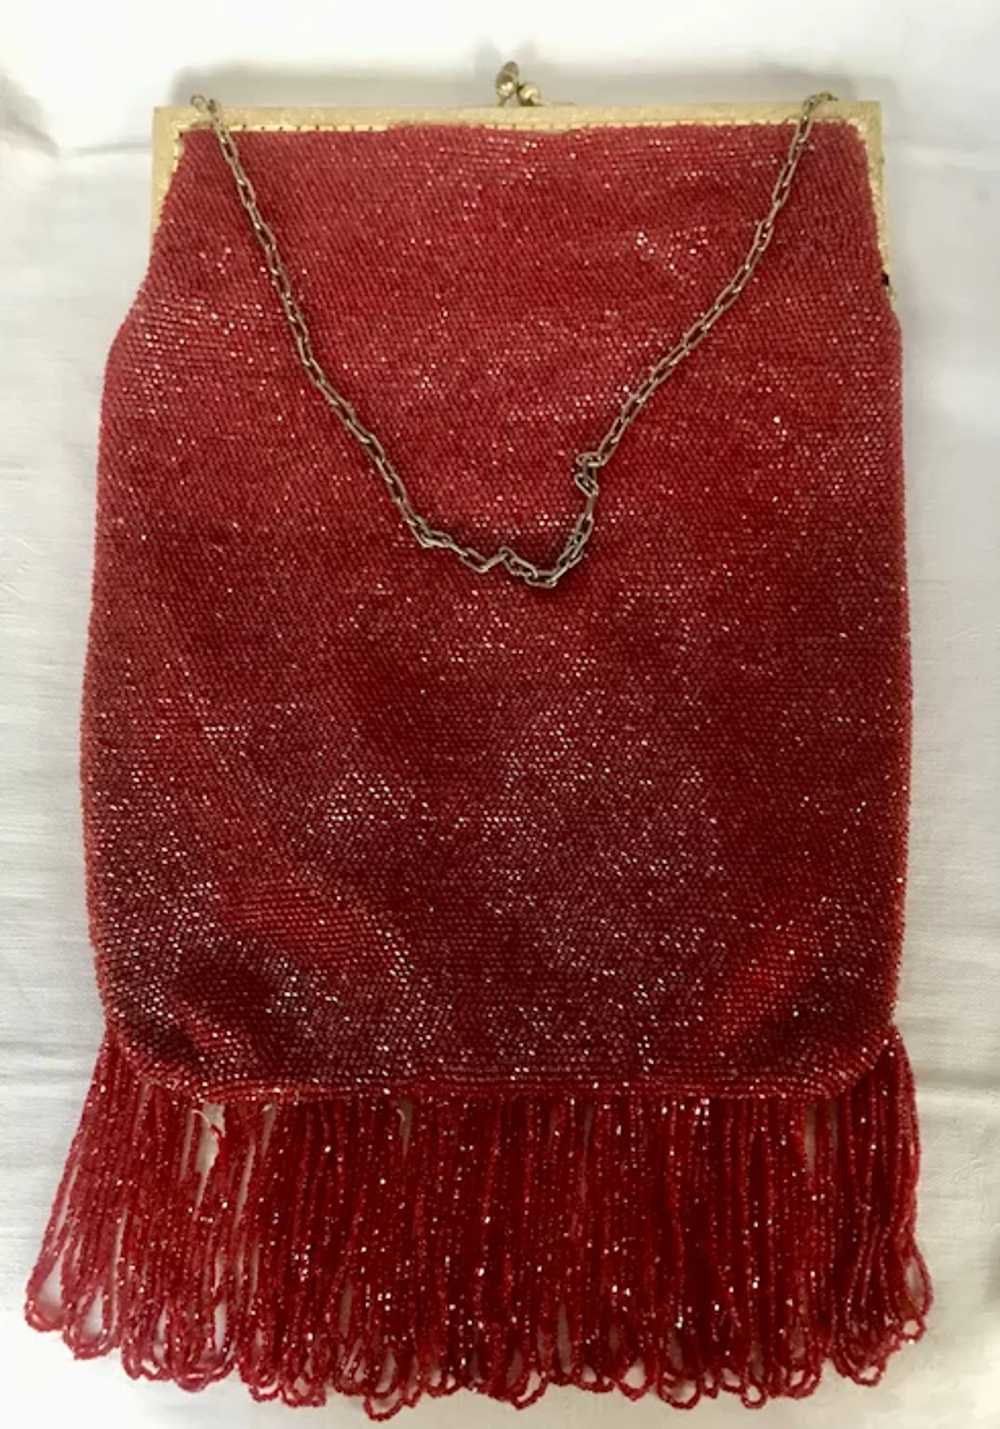 Vintage Large Red Micro Glass Bead Flapper Bag - image 2